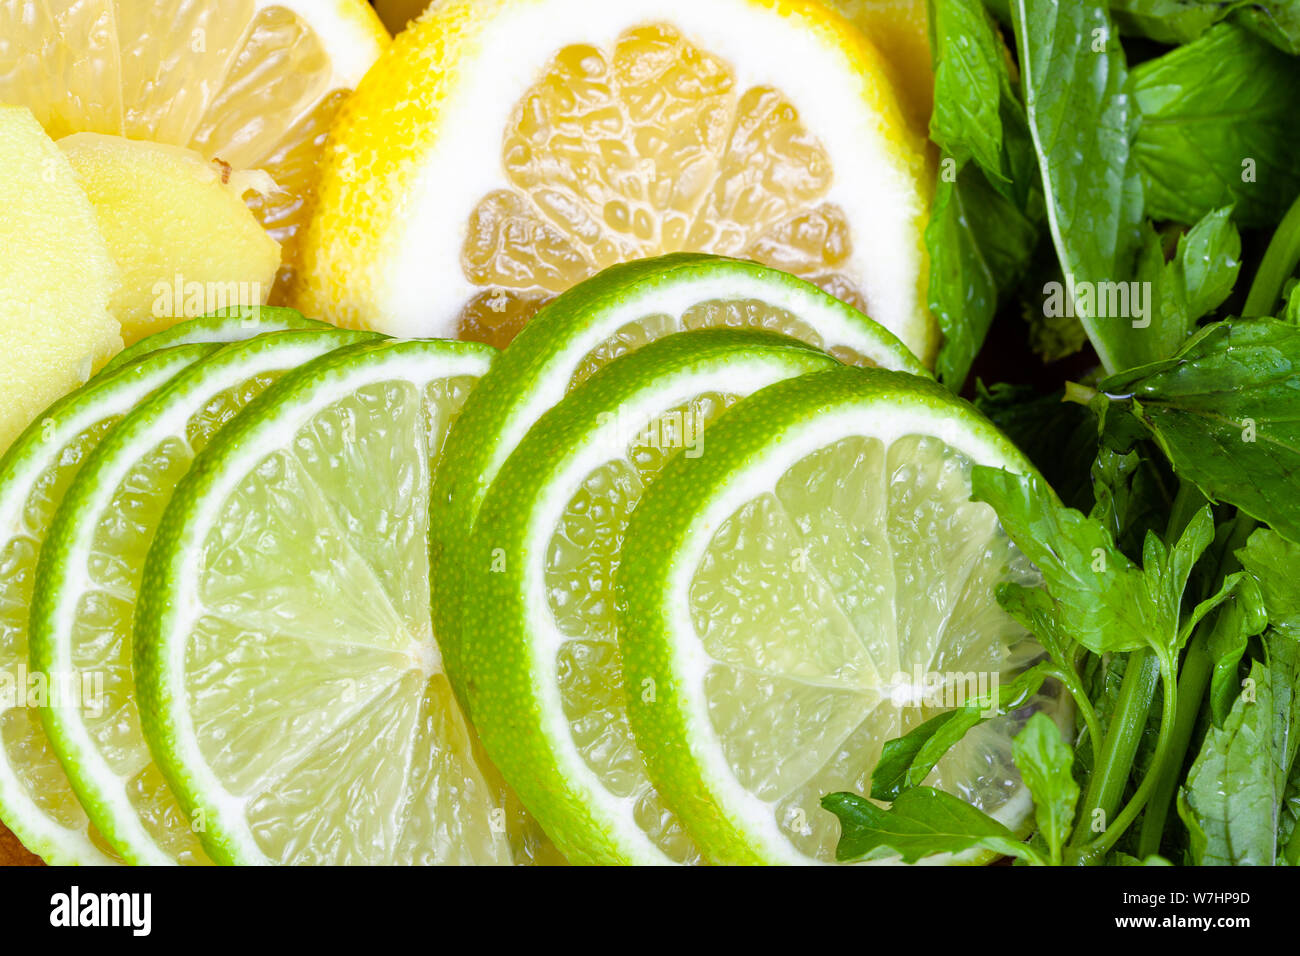 food background - cocktail ingredients, thin sliced fresh limes, lemons and ginger with green mint leaves close up Stock Photo